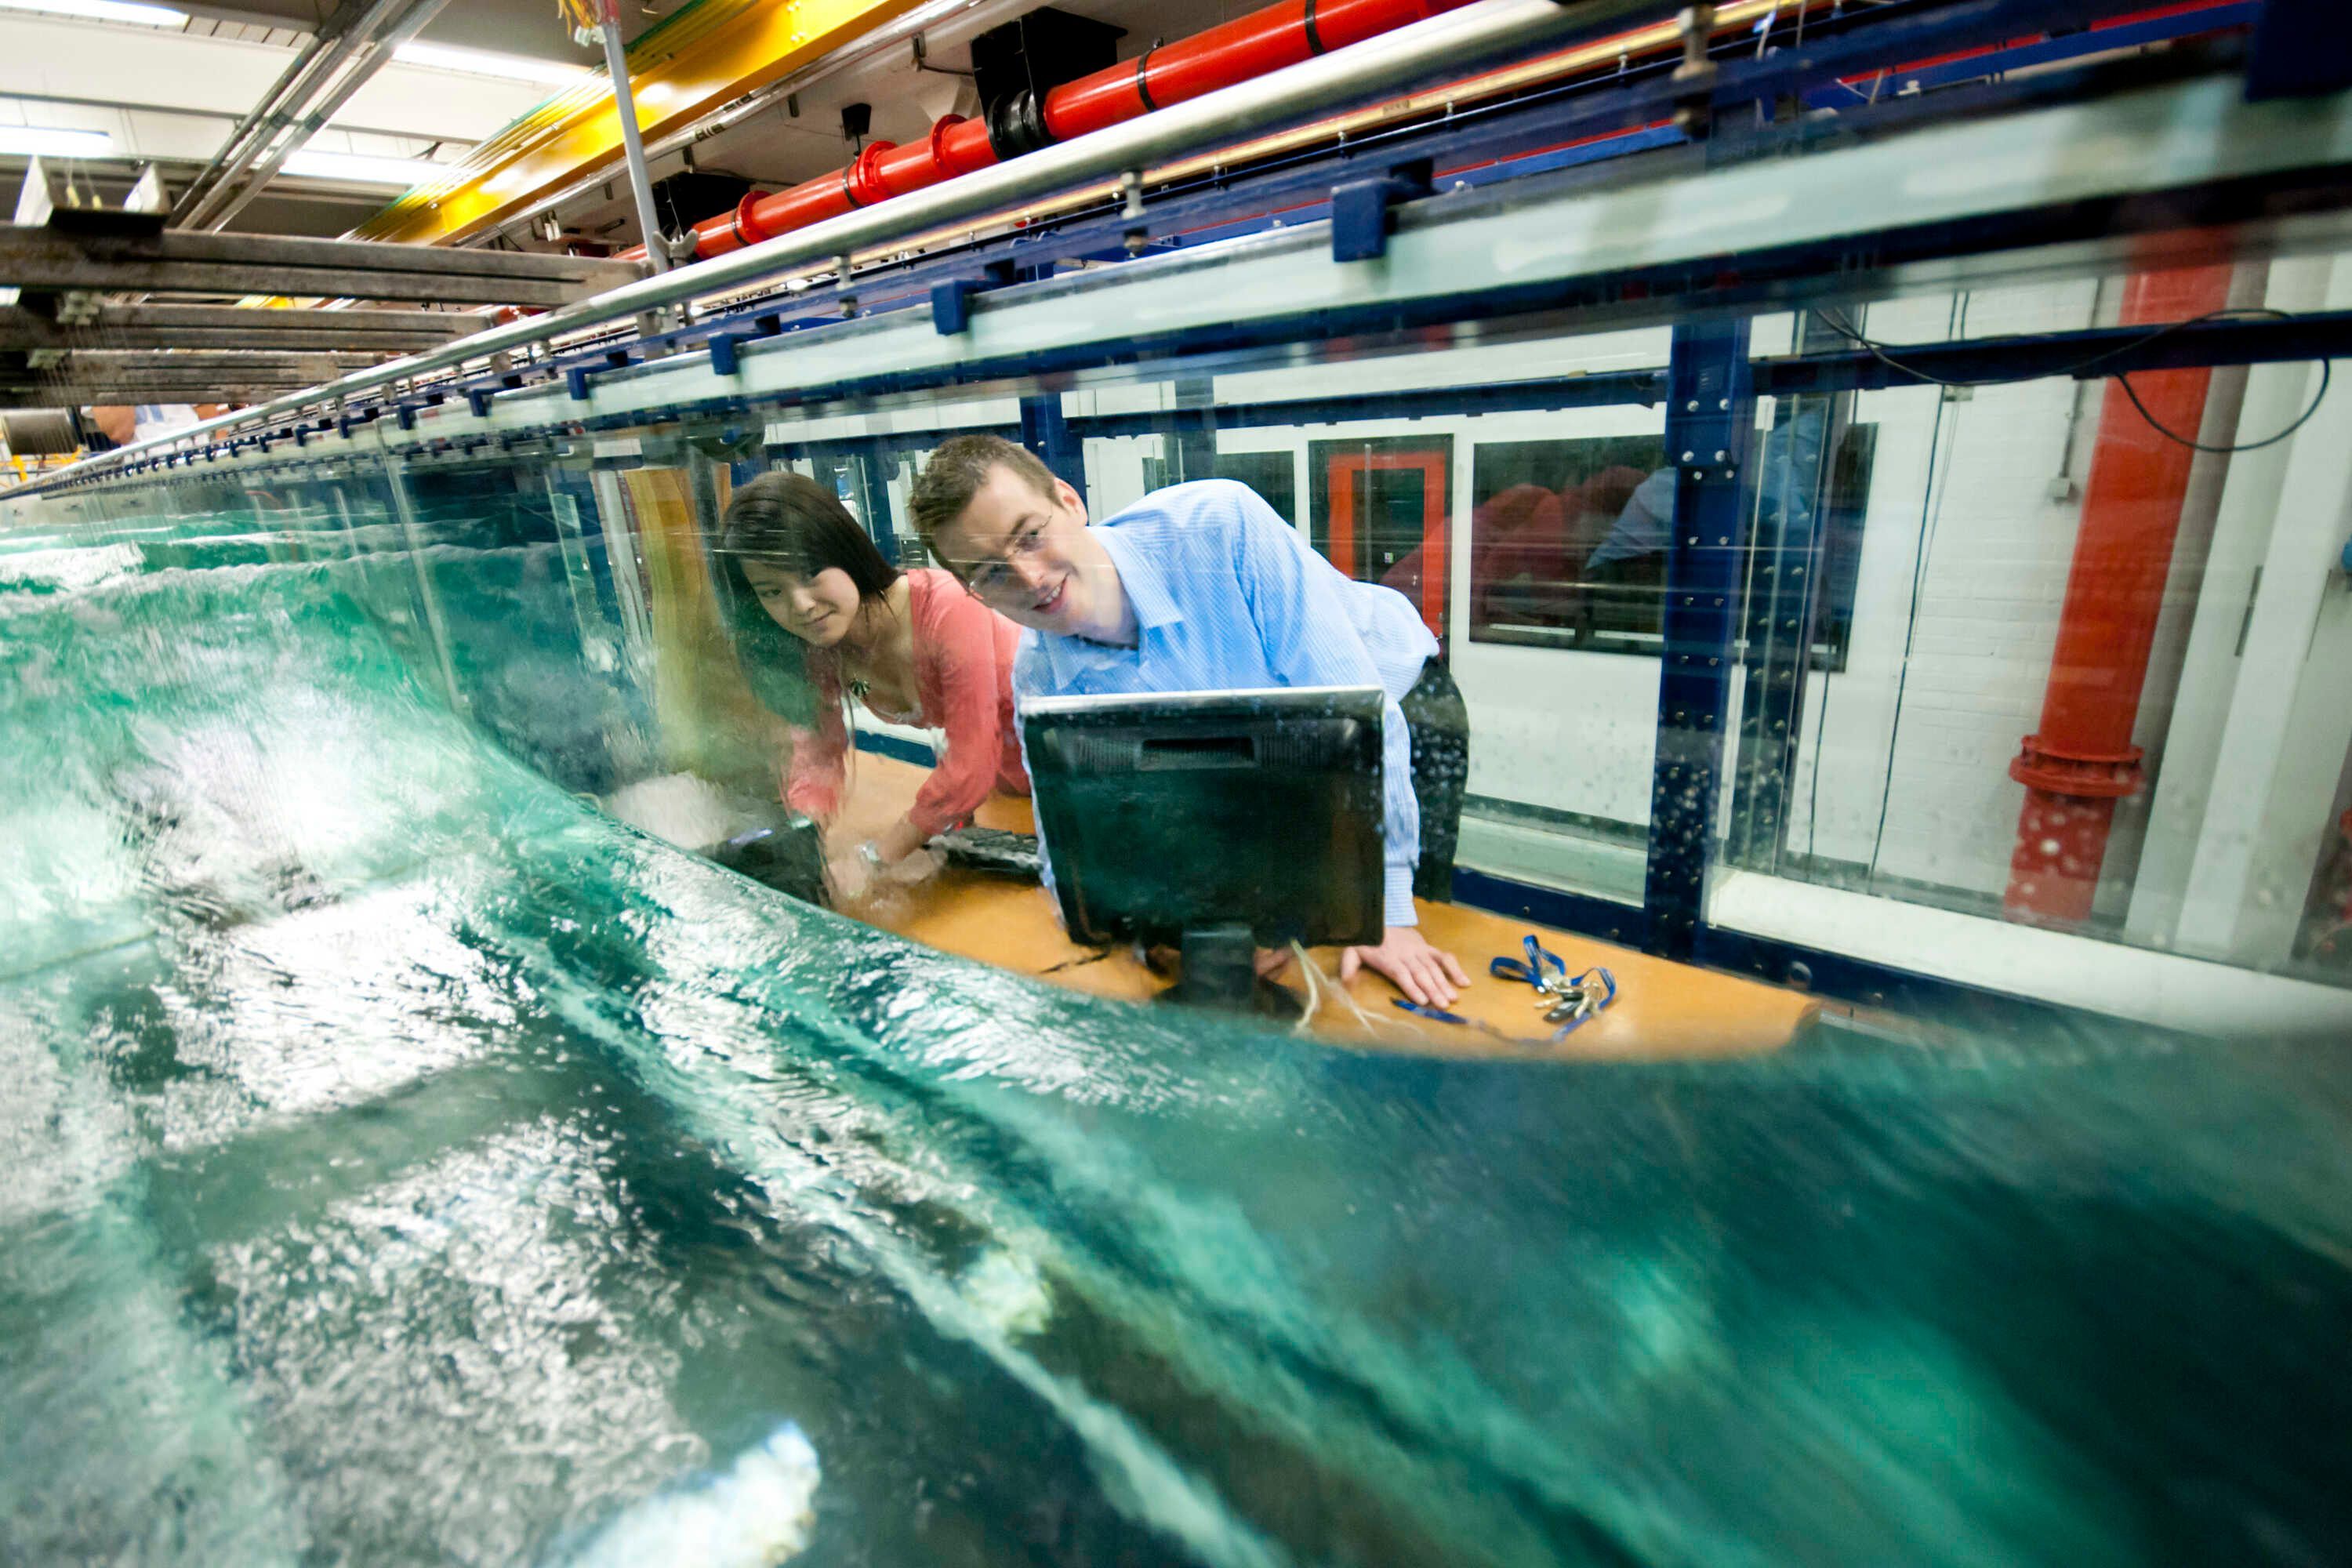 Researcher working in the fluid mechanics section at Imperial.